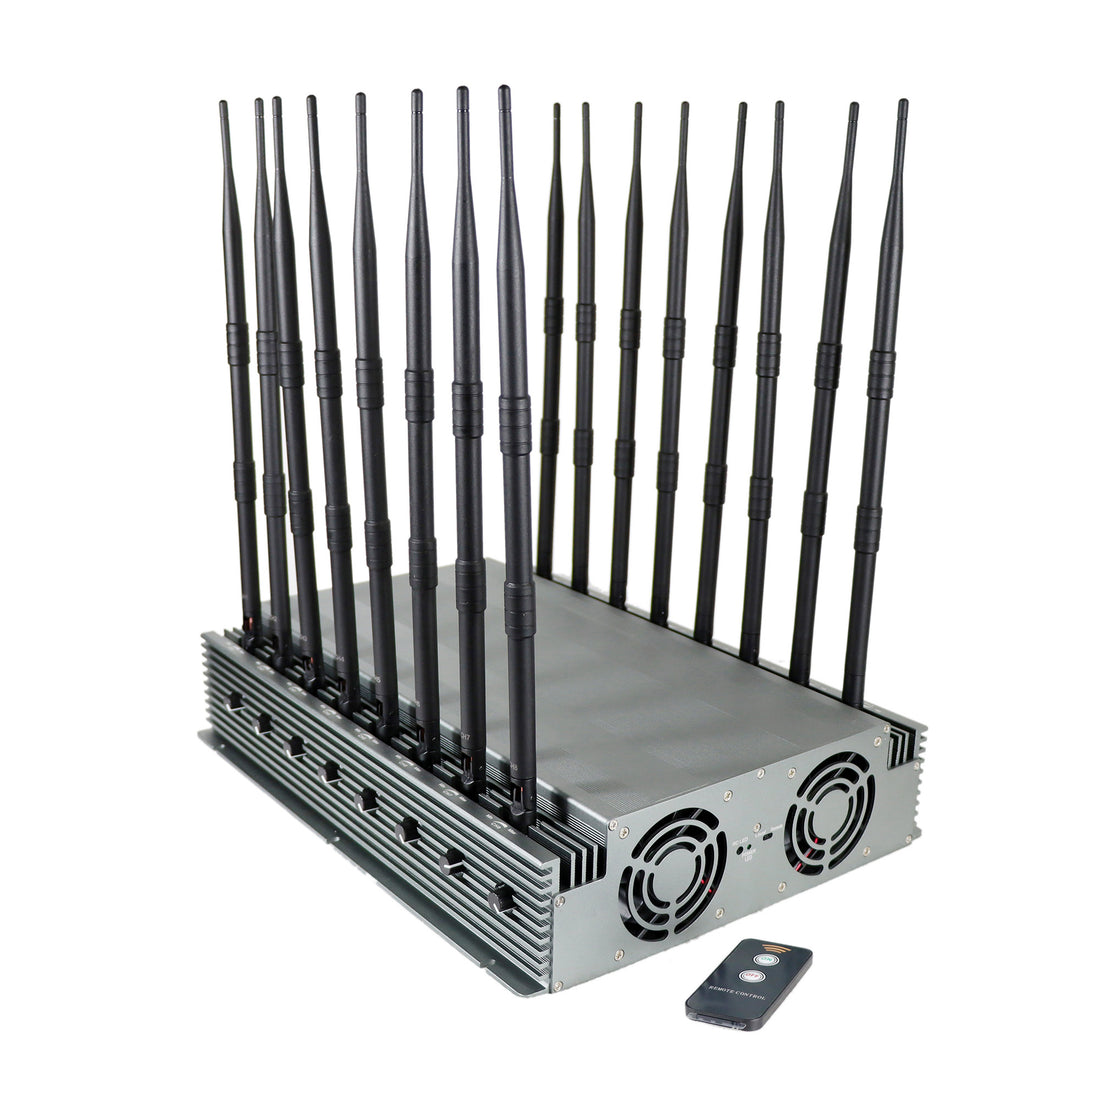 Will using the mobile phone signal jammer in the examination room affect other electronic devices?